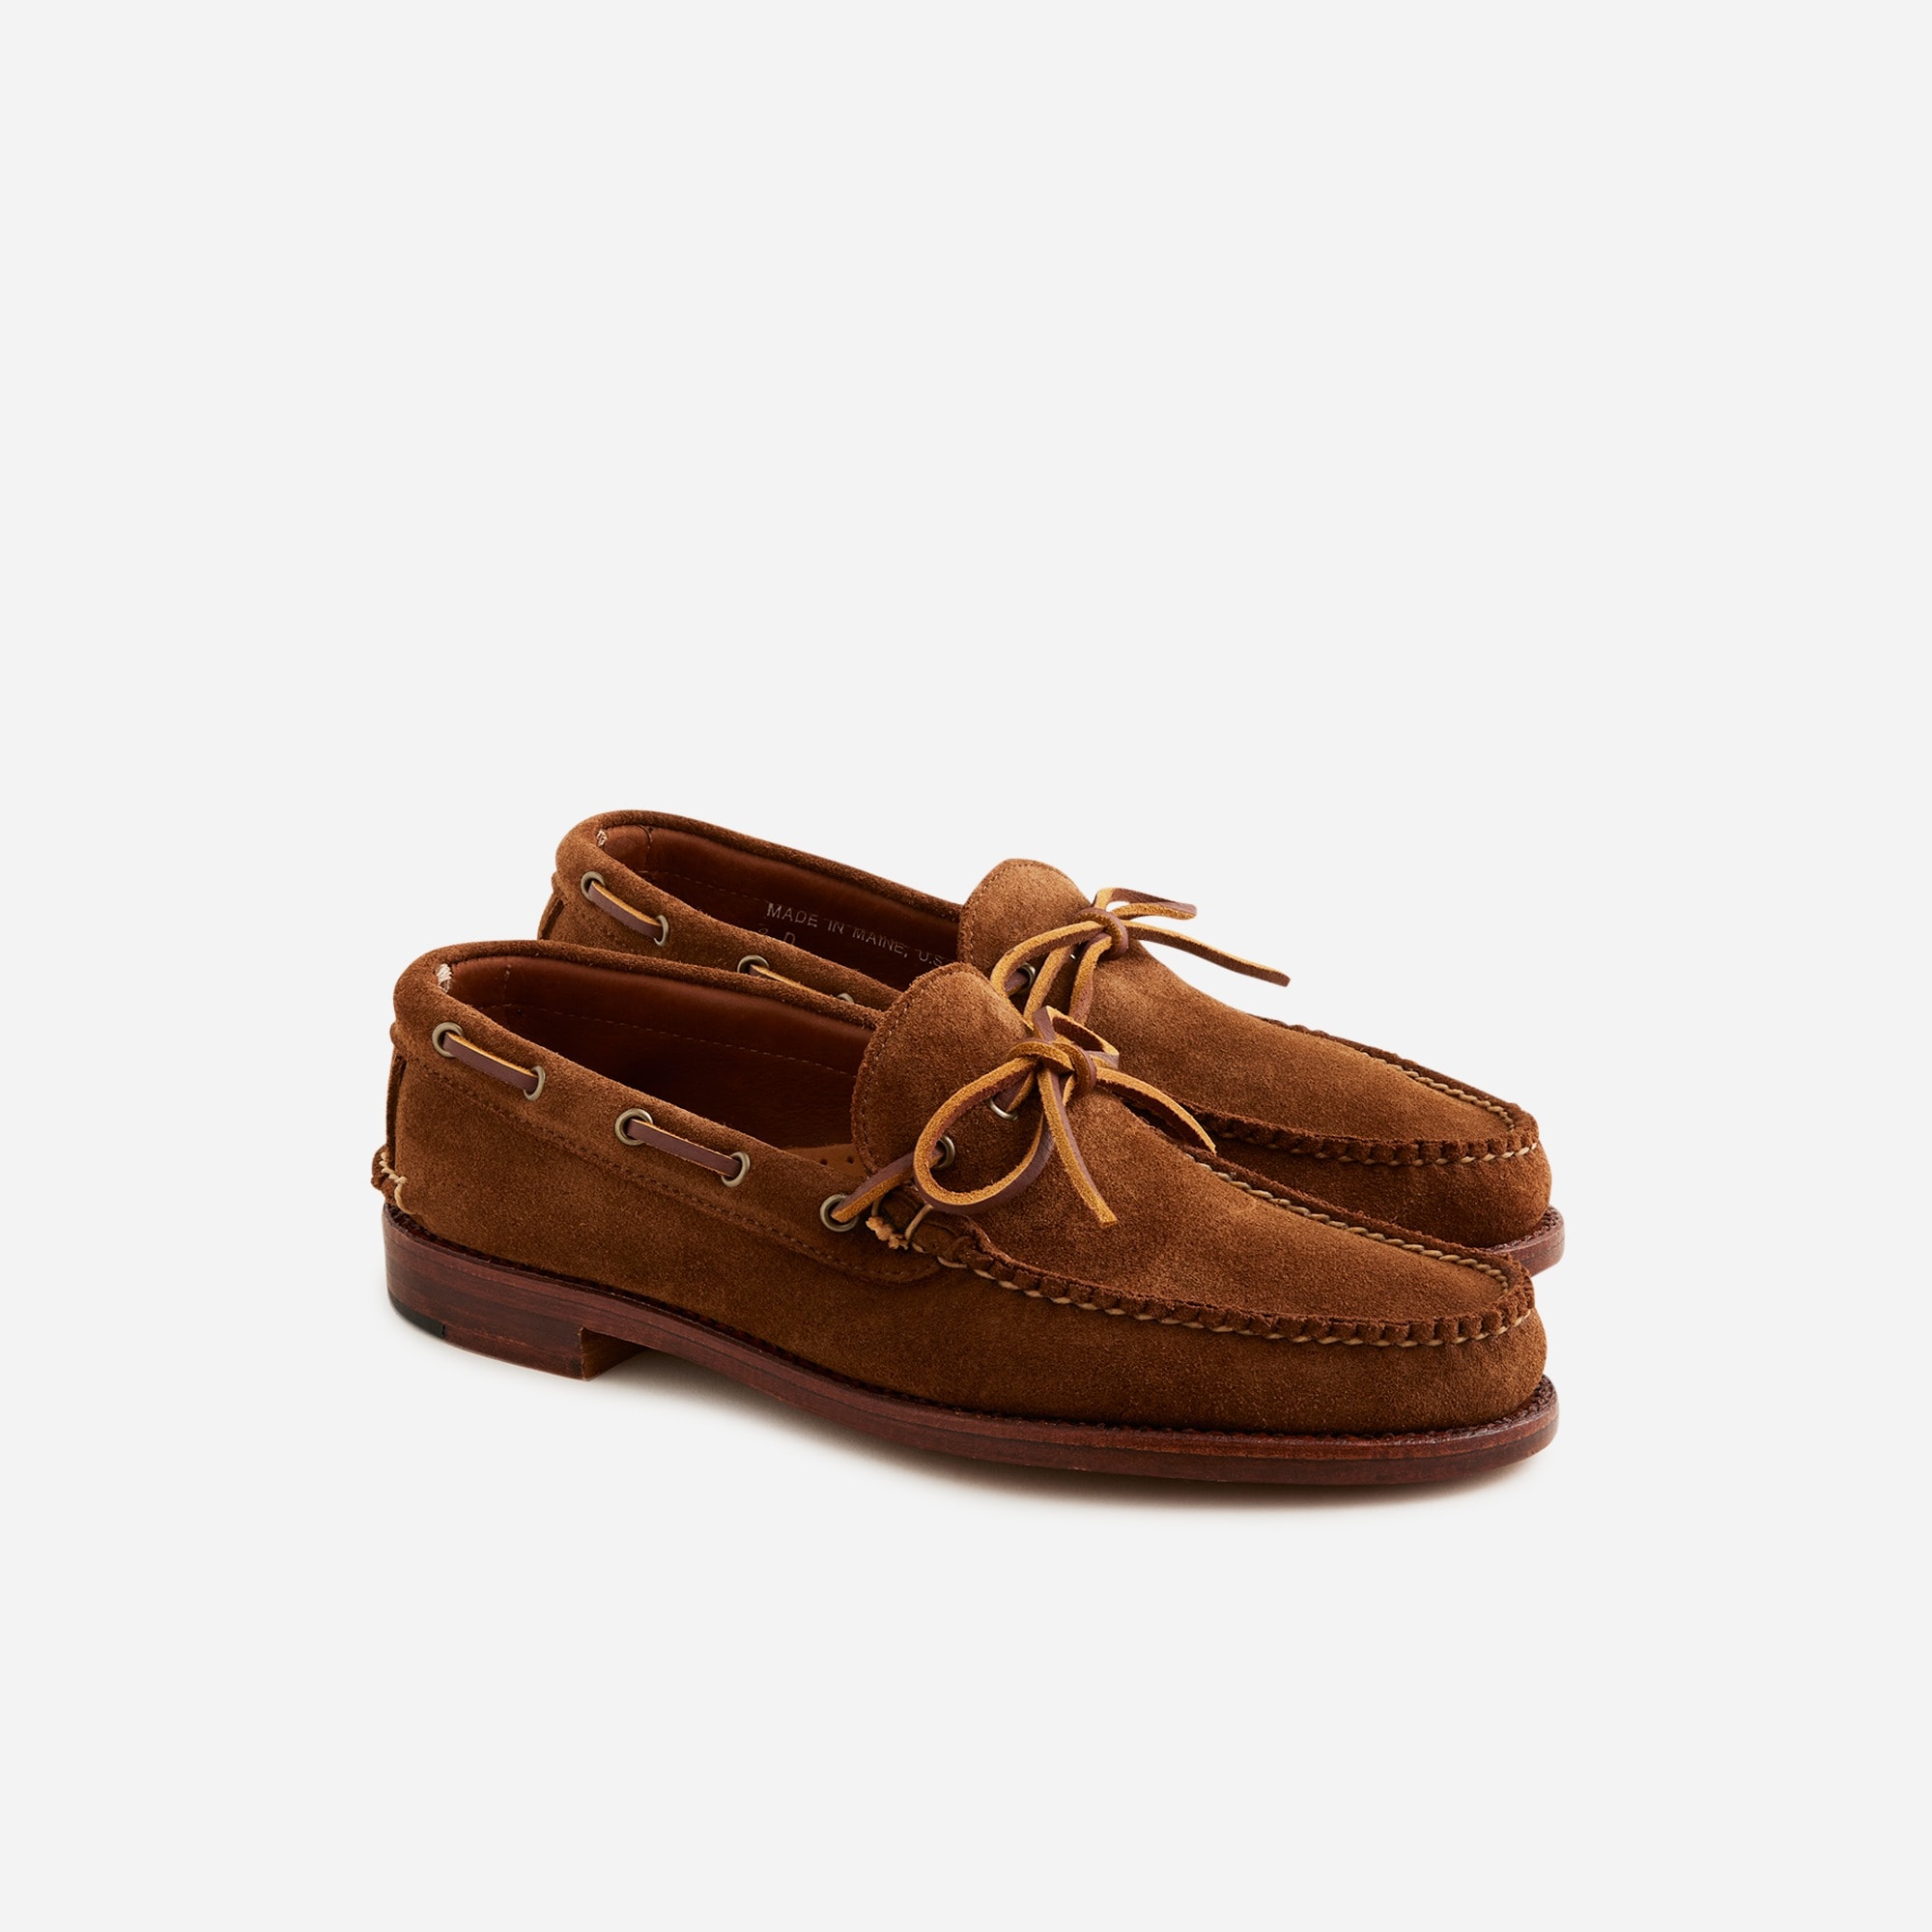  Rancourt &amp; Co. X J.Crew Gilman Camp-mocs in English suede